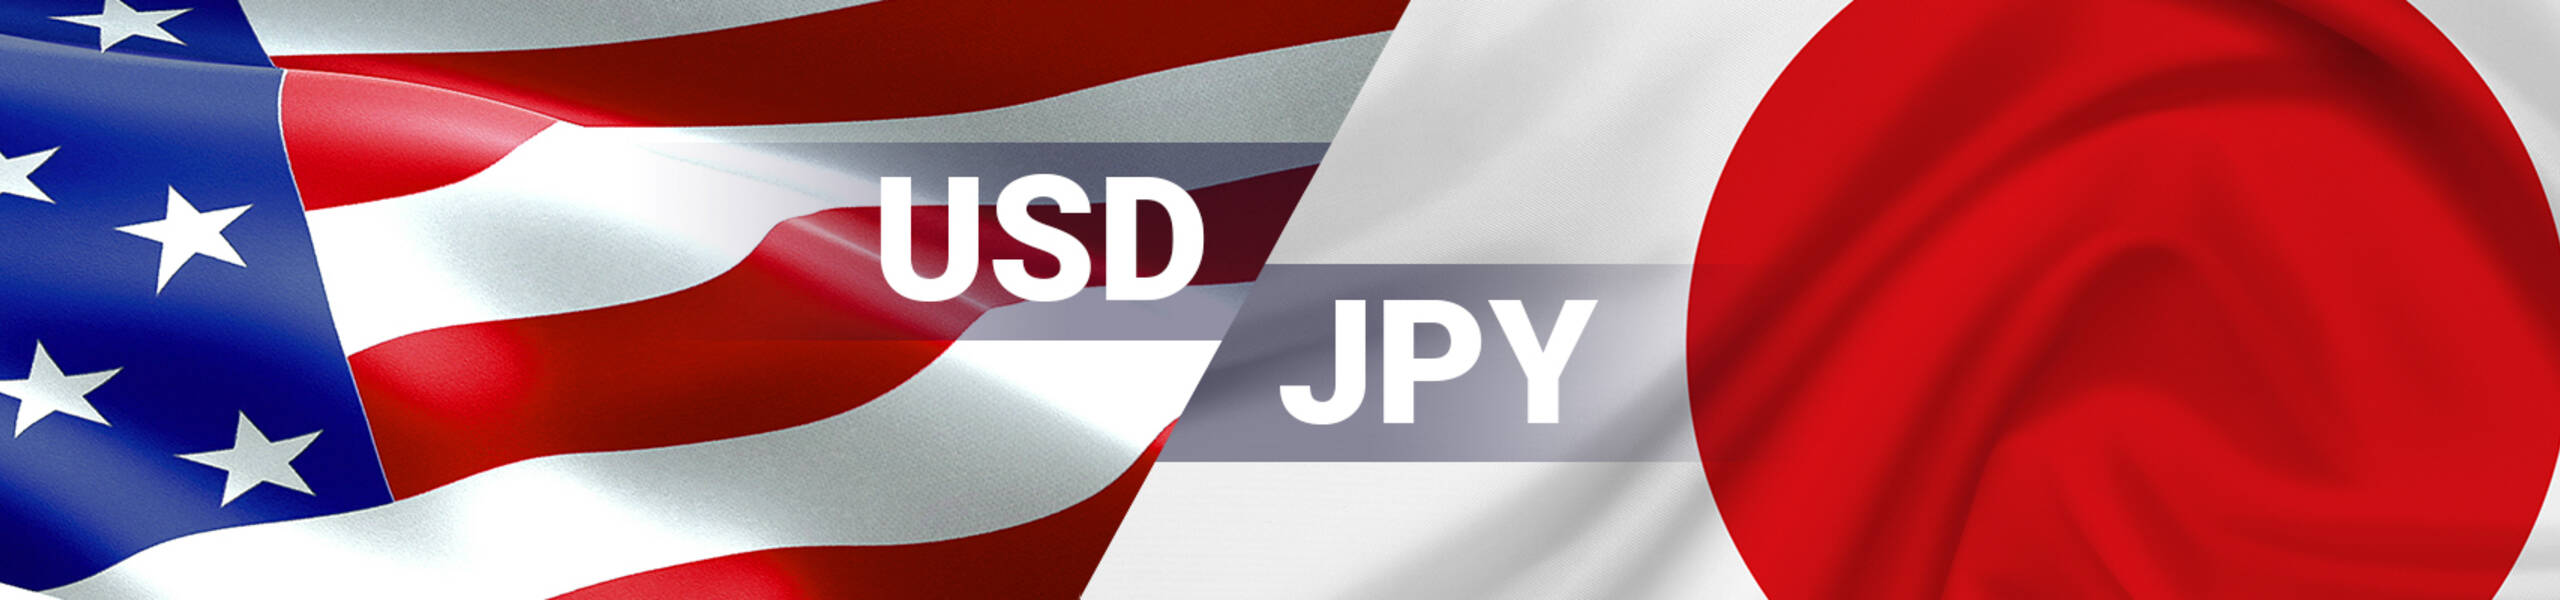 USD/JPY Dailyレポート 2017/05/12